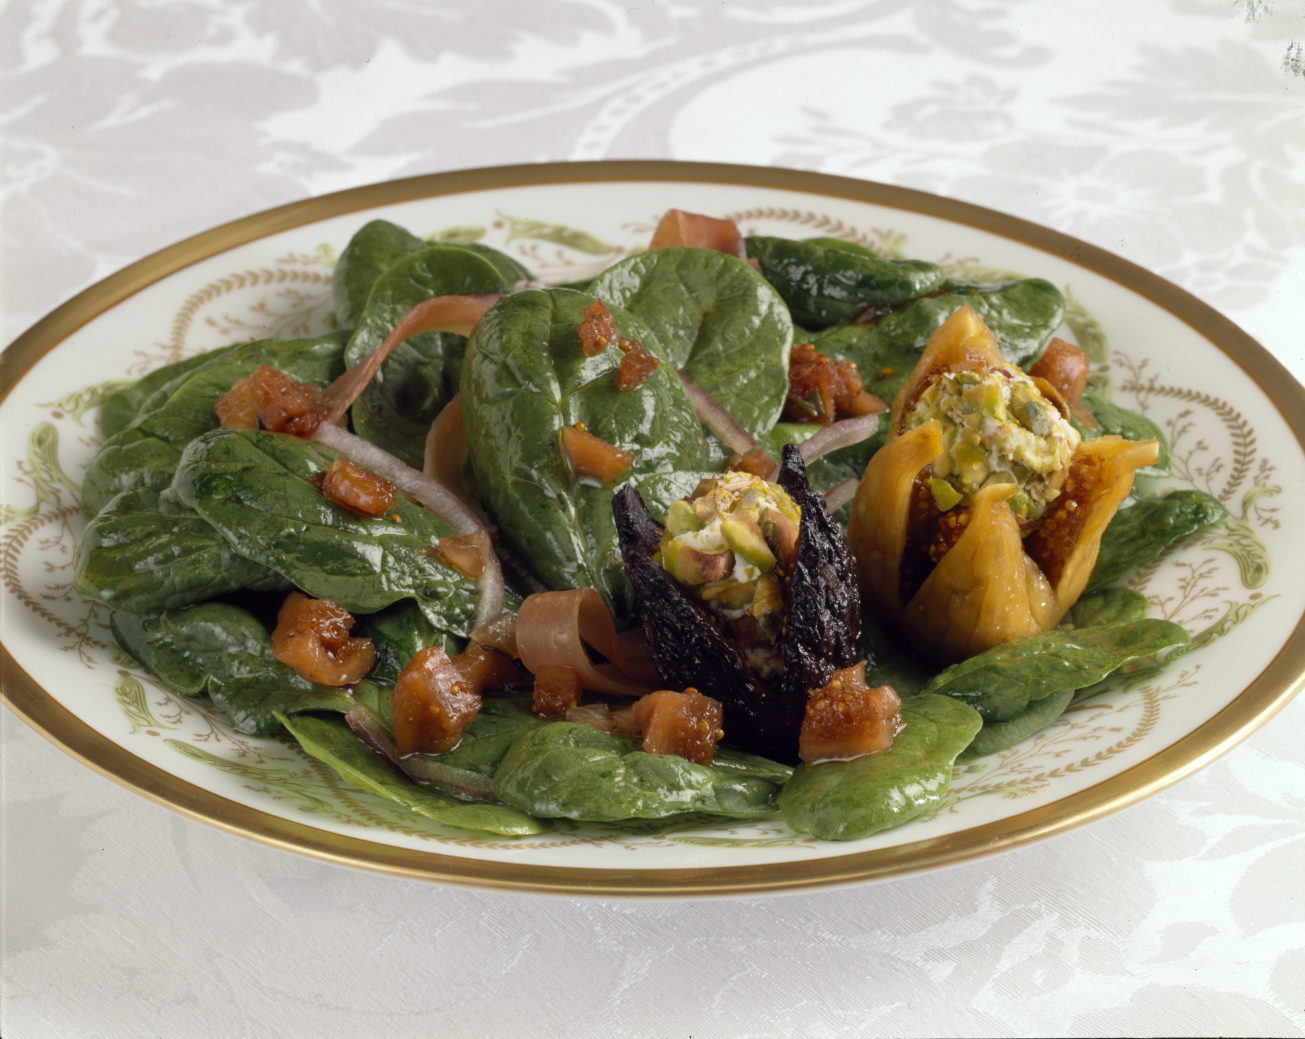 Spinach Salad with Stuffed Figs